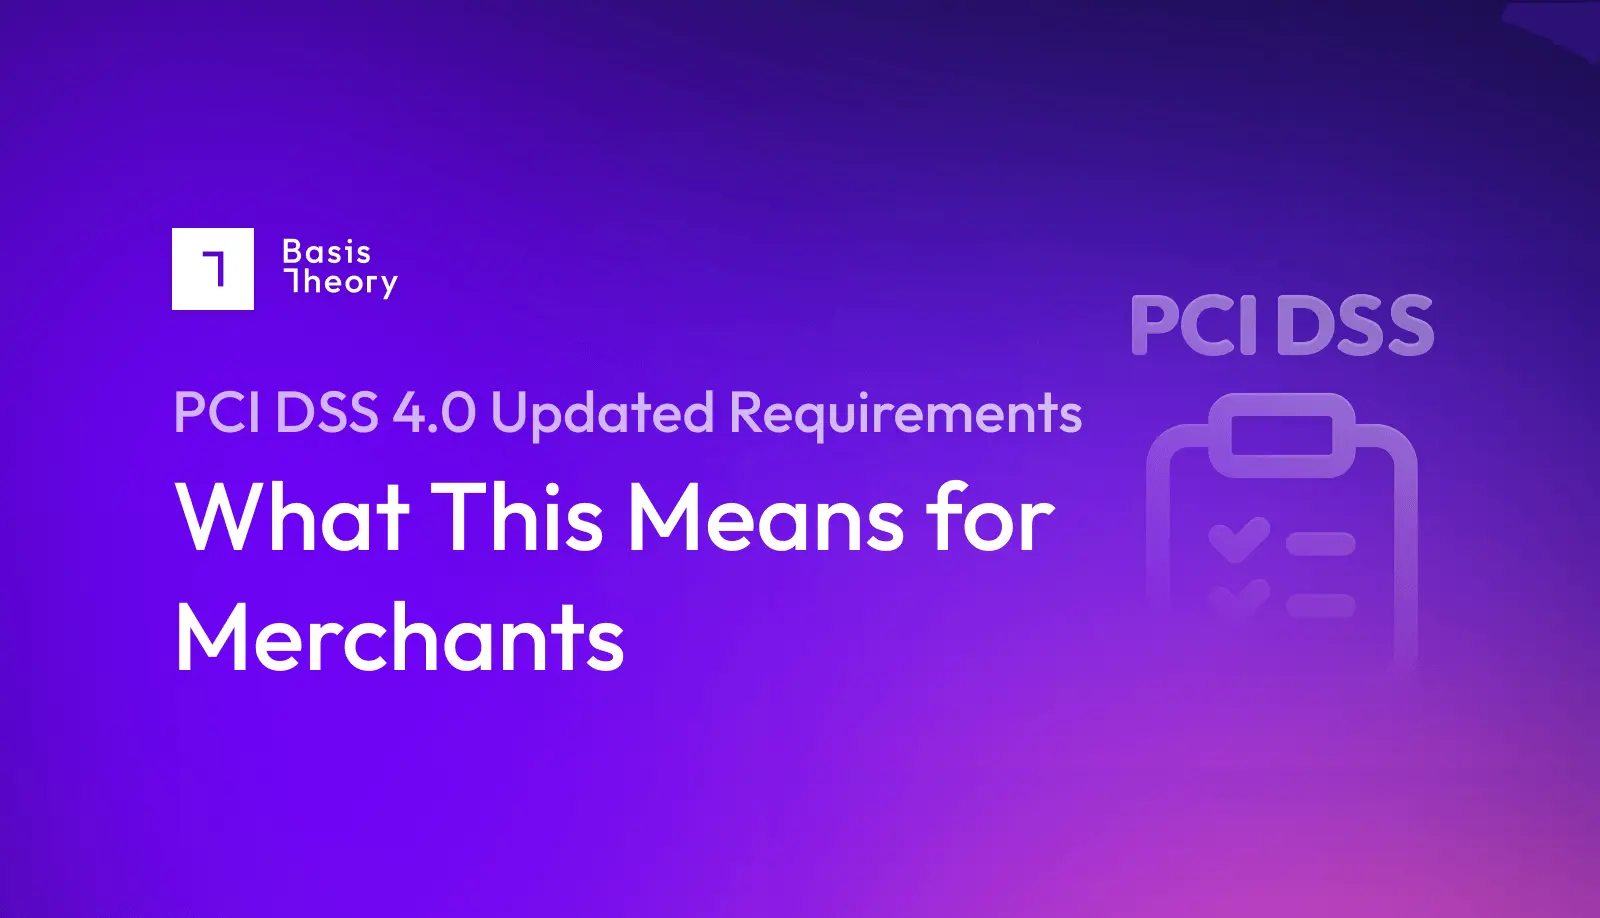 PCI 4.0 Updates: What this means for merchants